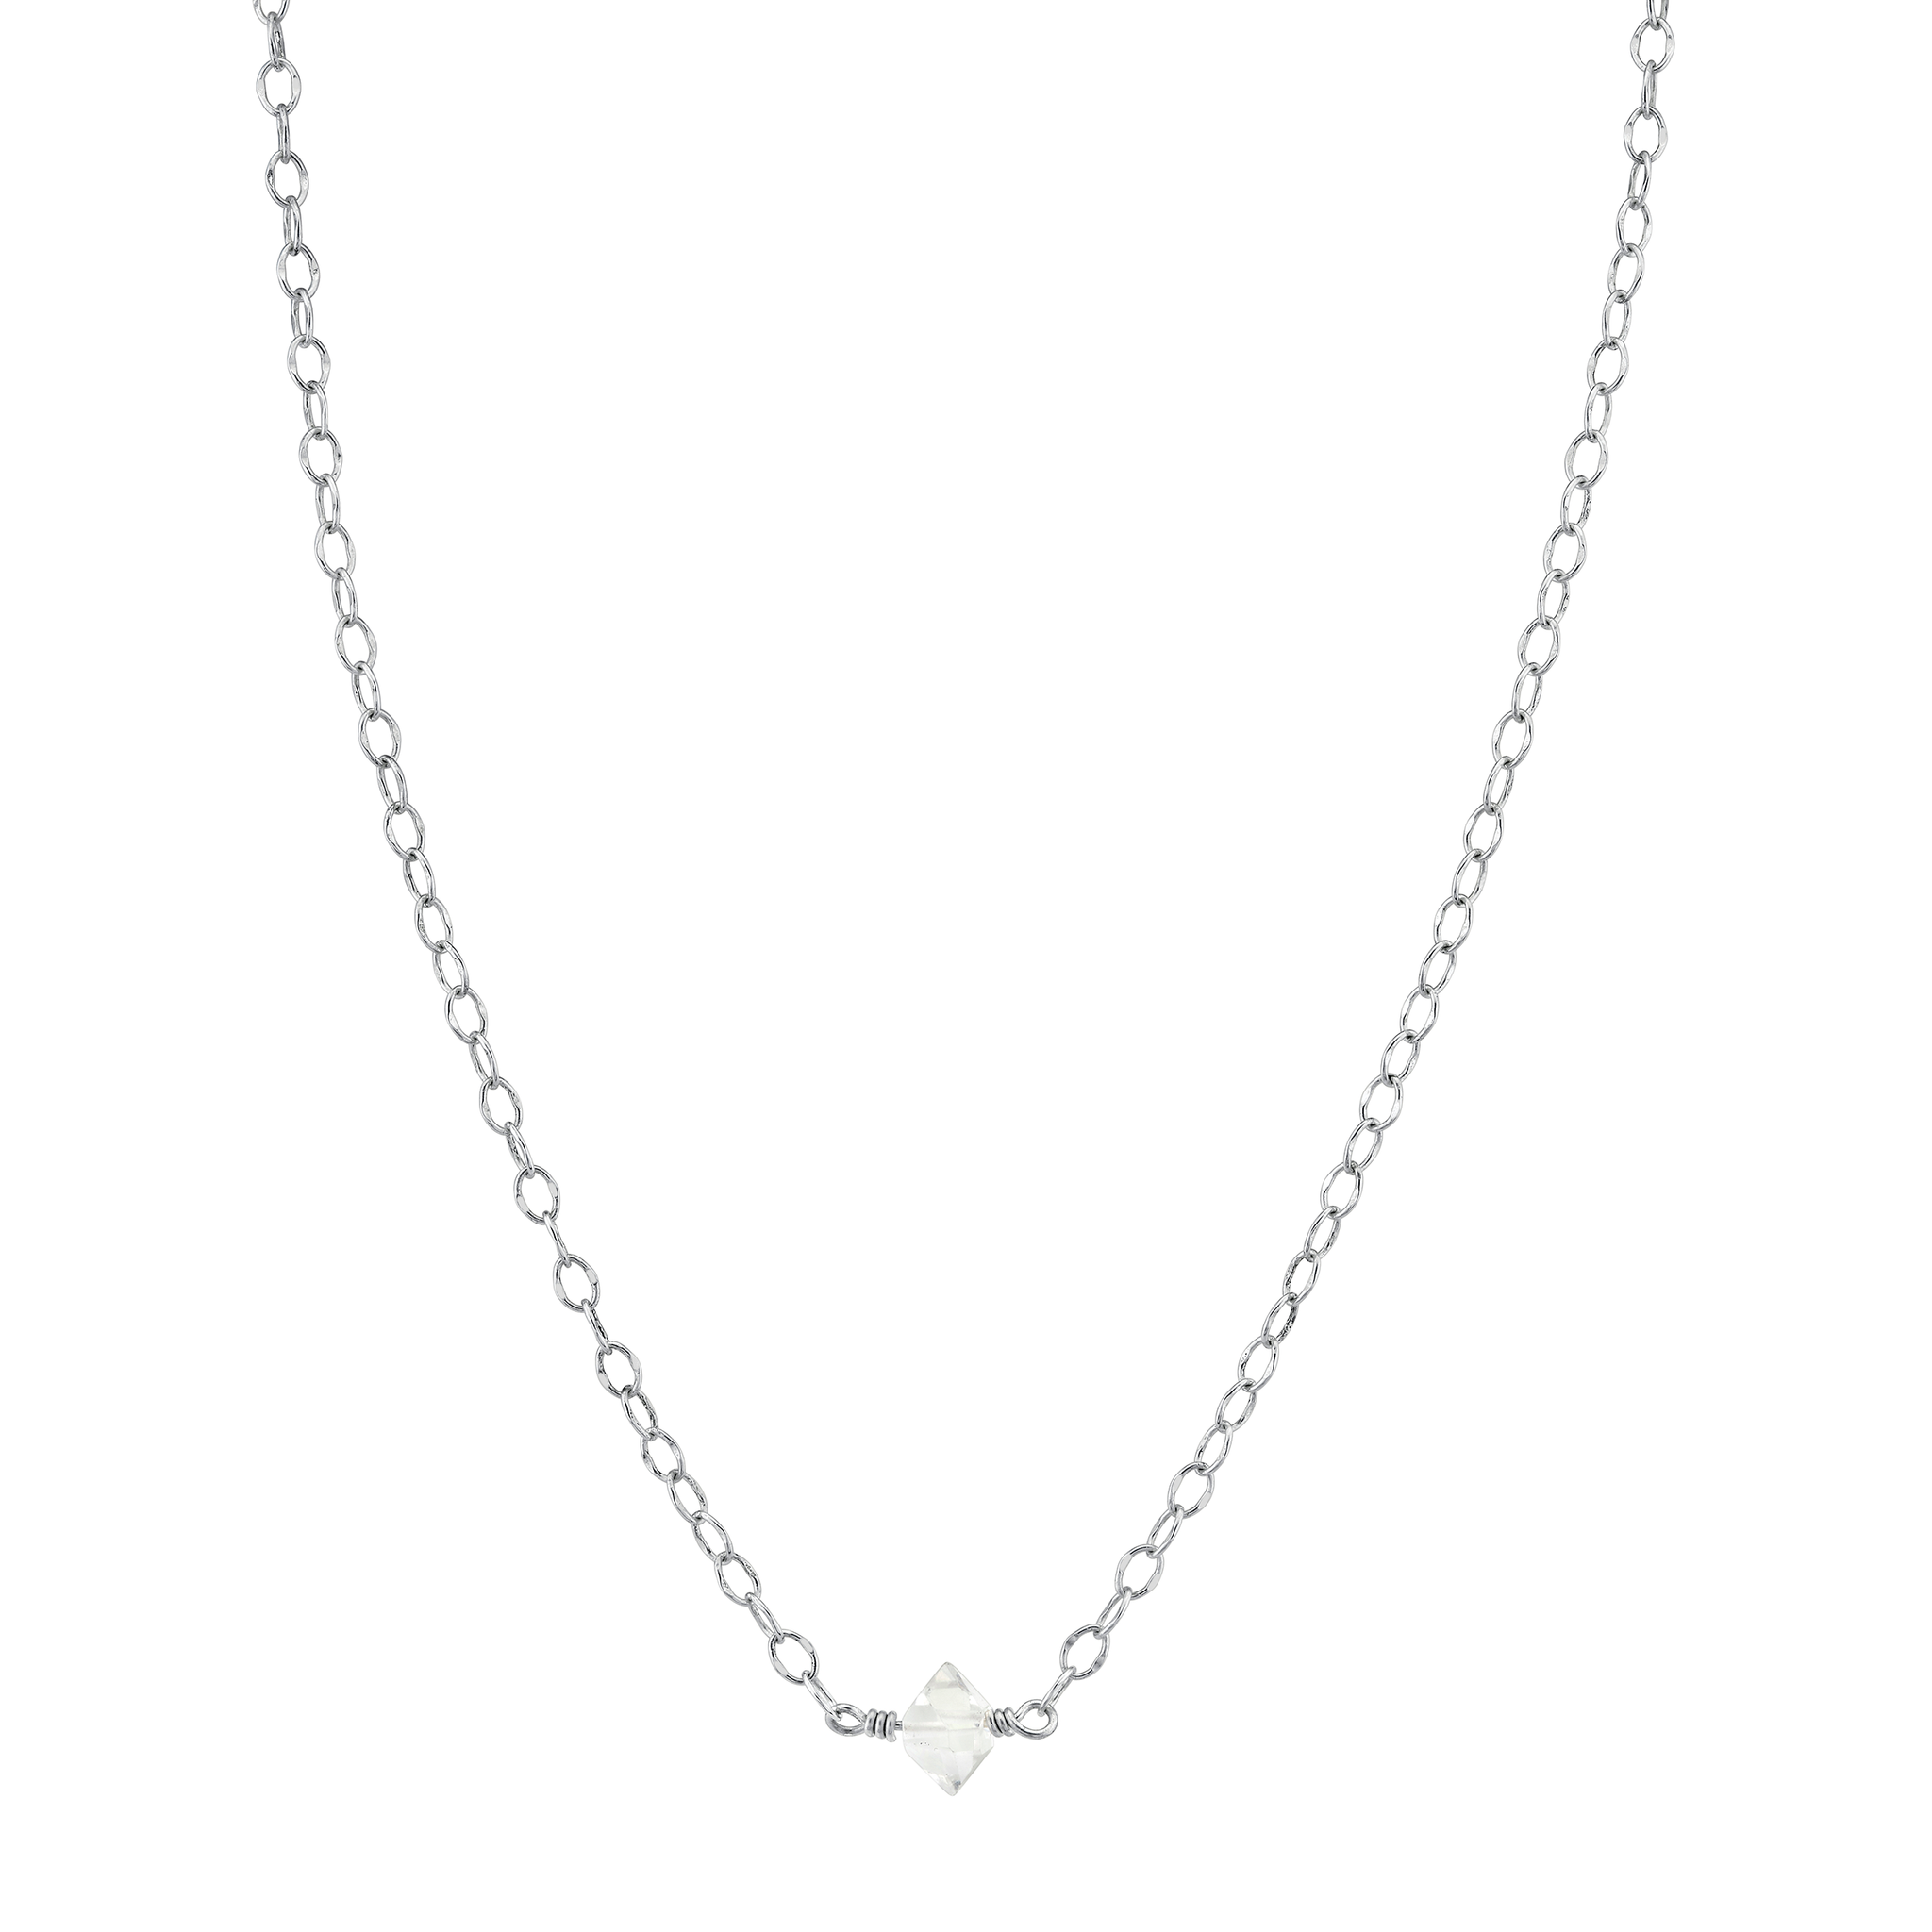 Candice Silver Necklace with Herkimer Diamond